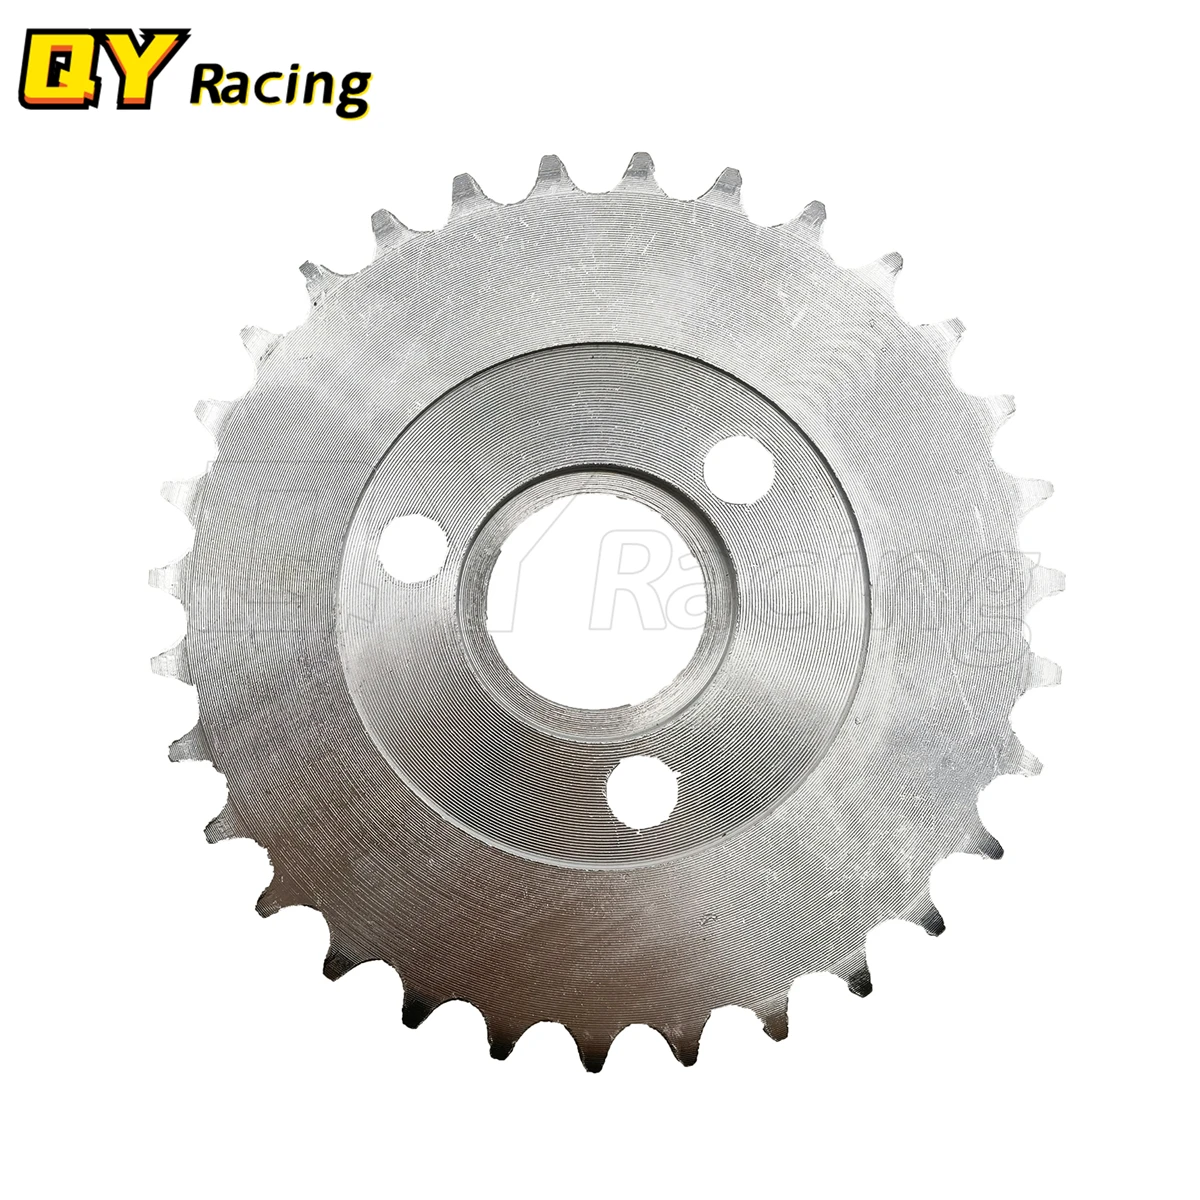 

Motorcycle Parts Z50 Rear Gear Sprocket 24T/29T/31T/35T/37T Tooth FOR 420 Chain for Pitbike RM Monkey Bike Z50 50CC